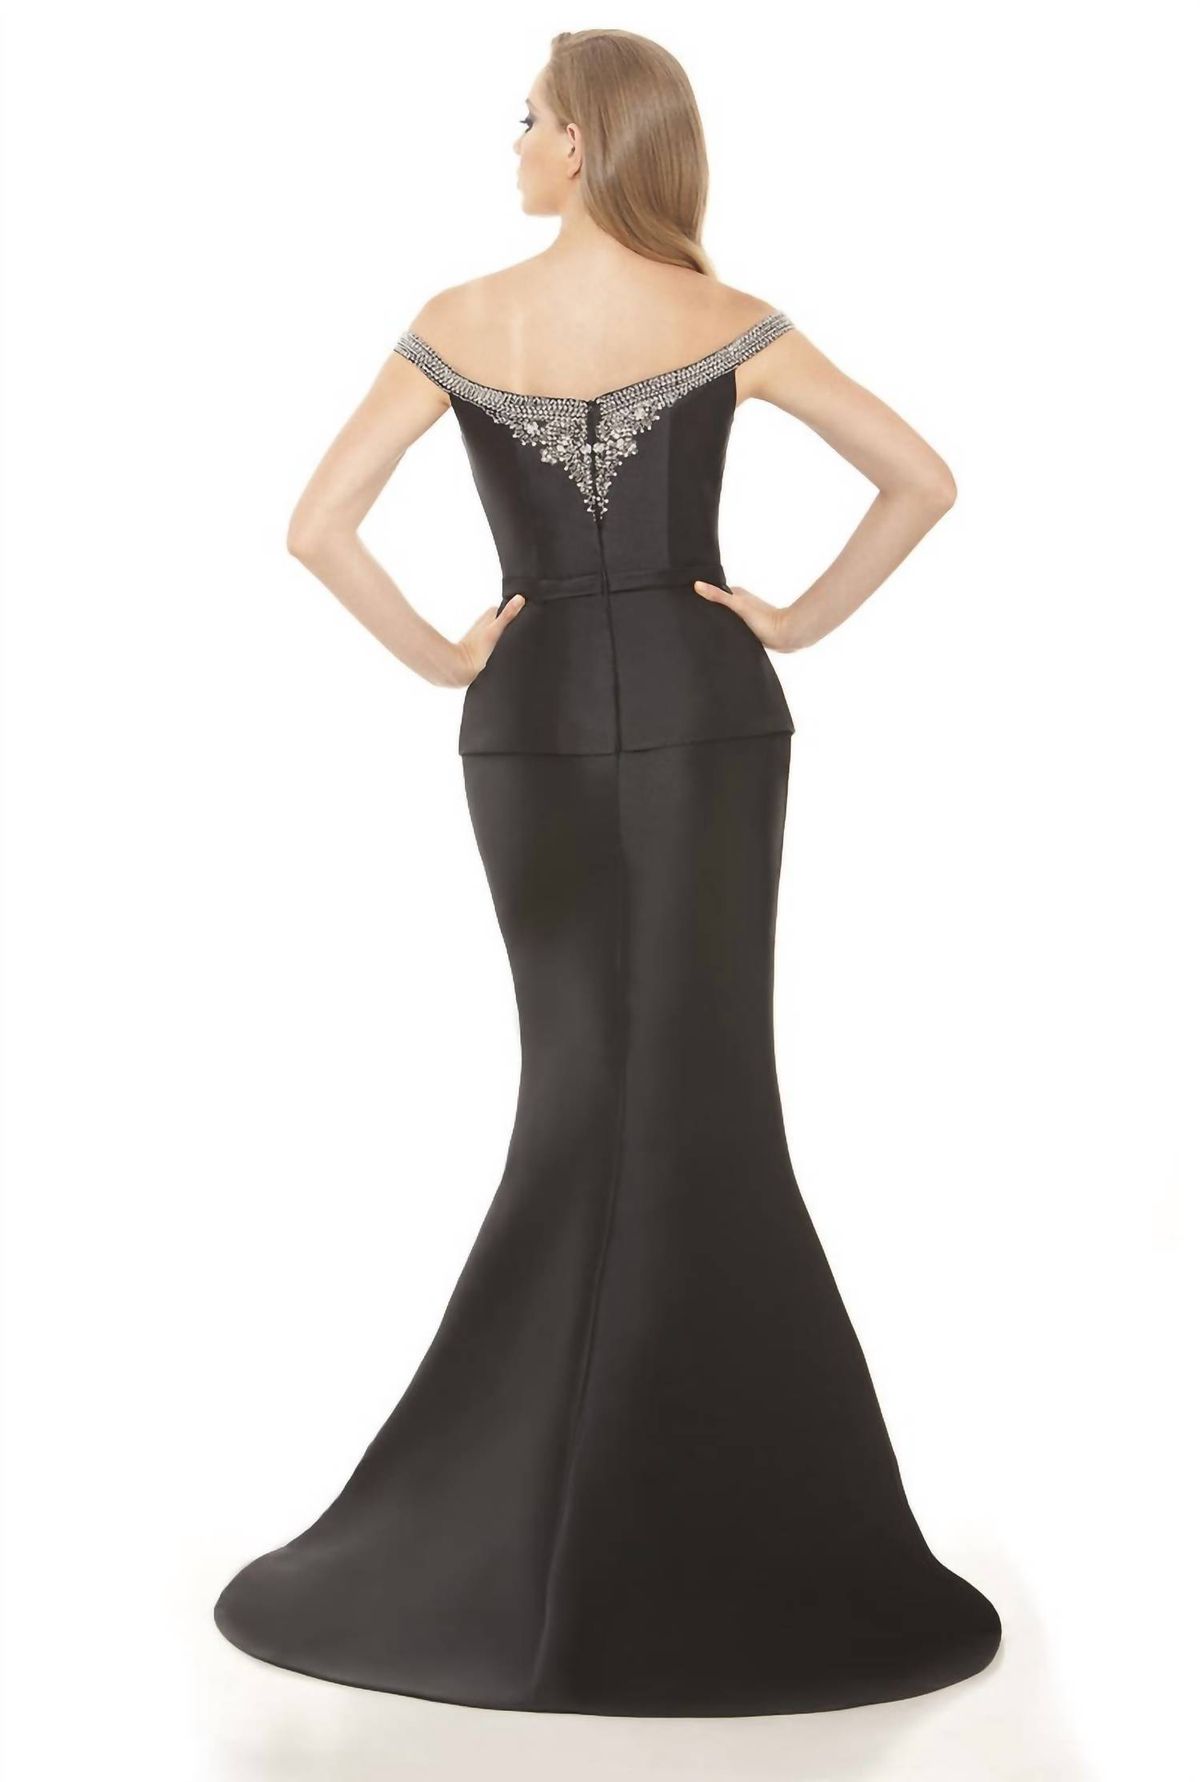 Style 1-4026689922-397 Elena Elias Size 14 Prom Off The Shoulder Sequined Black Mermaid Dress on Queenly